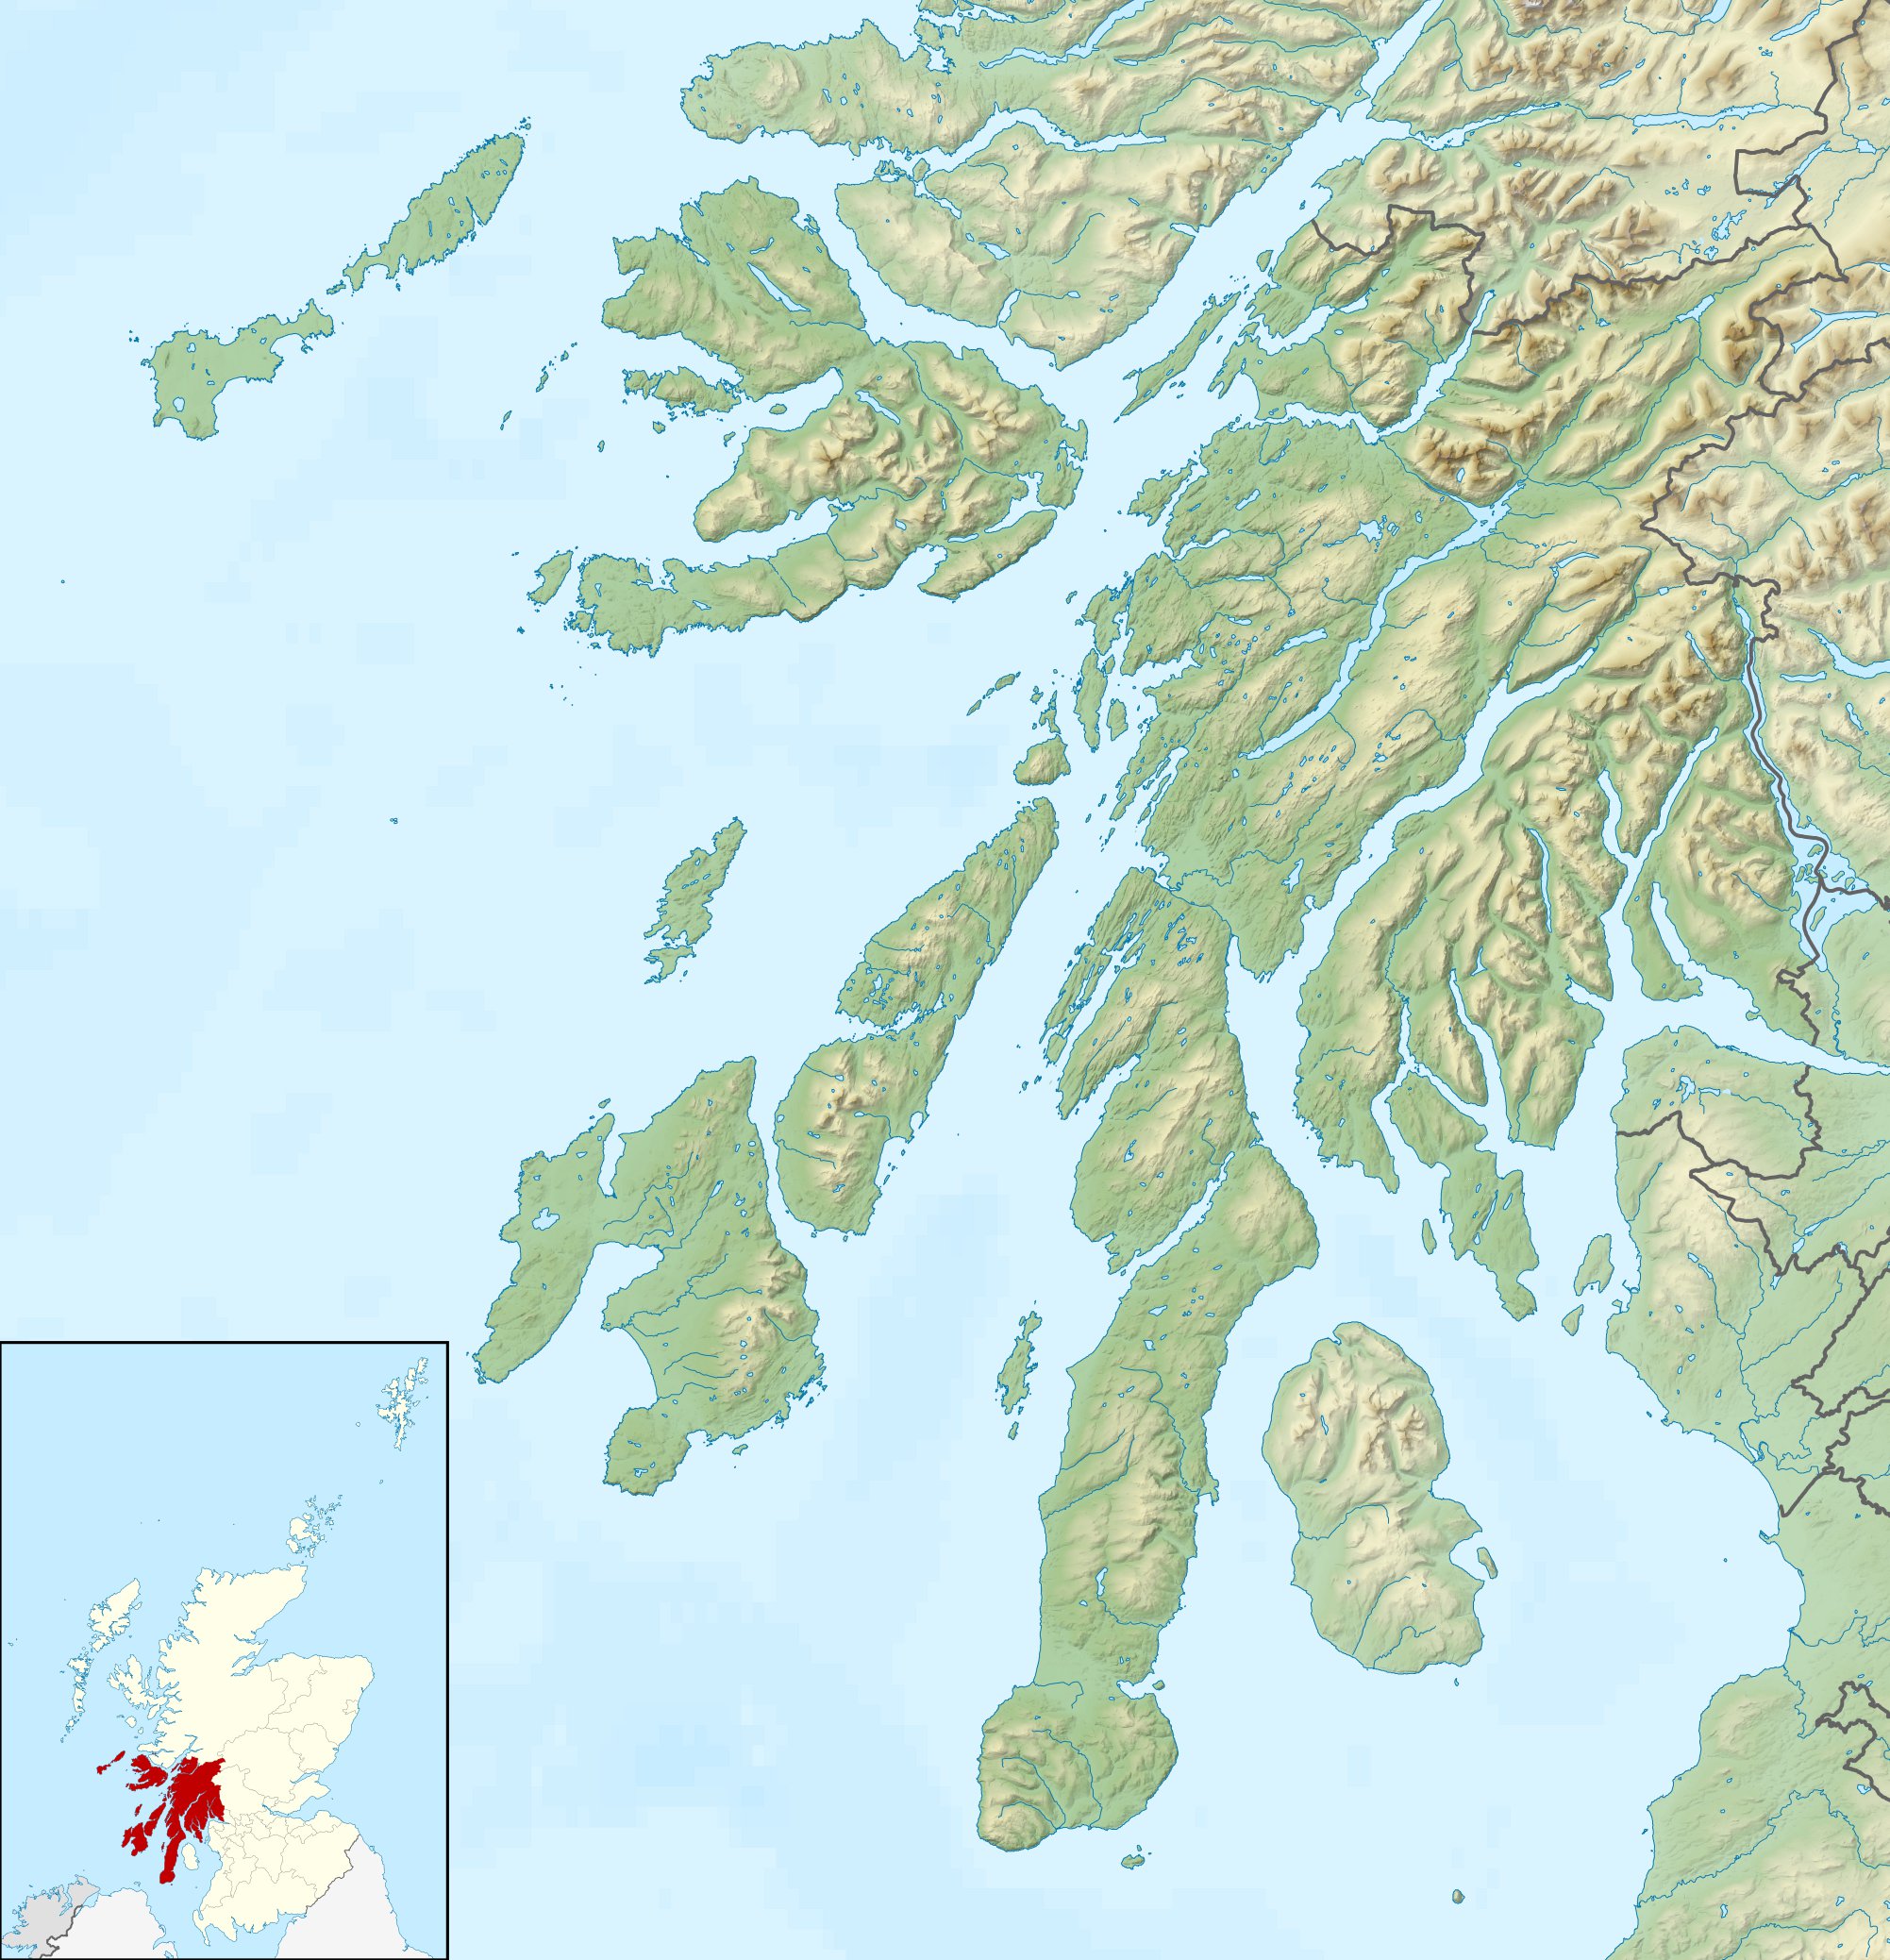 Gunna is located in Argyll and Bute